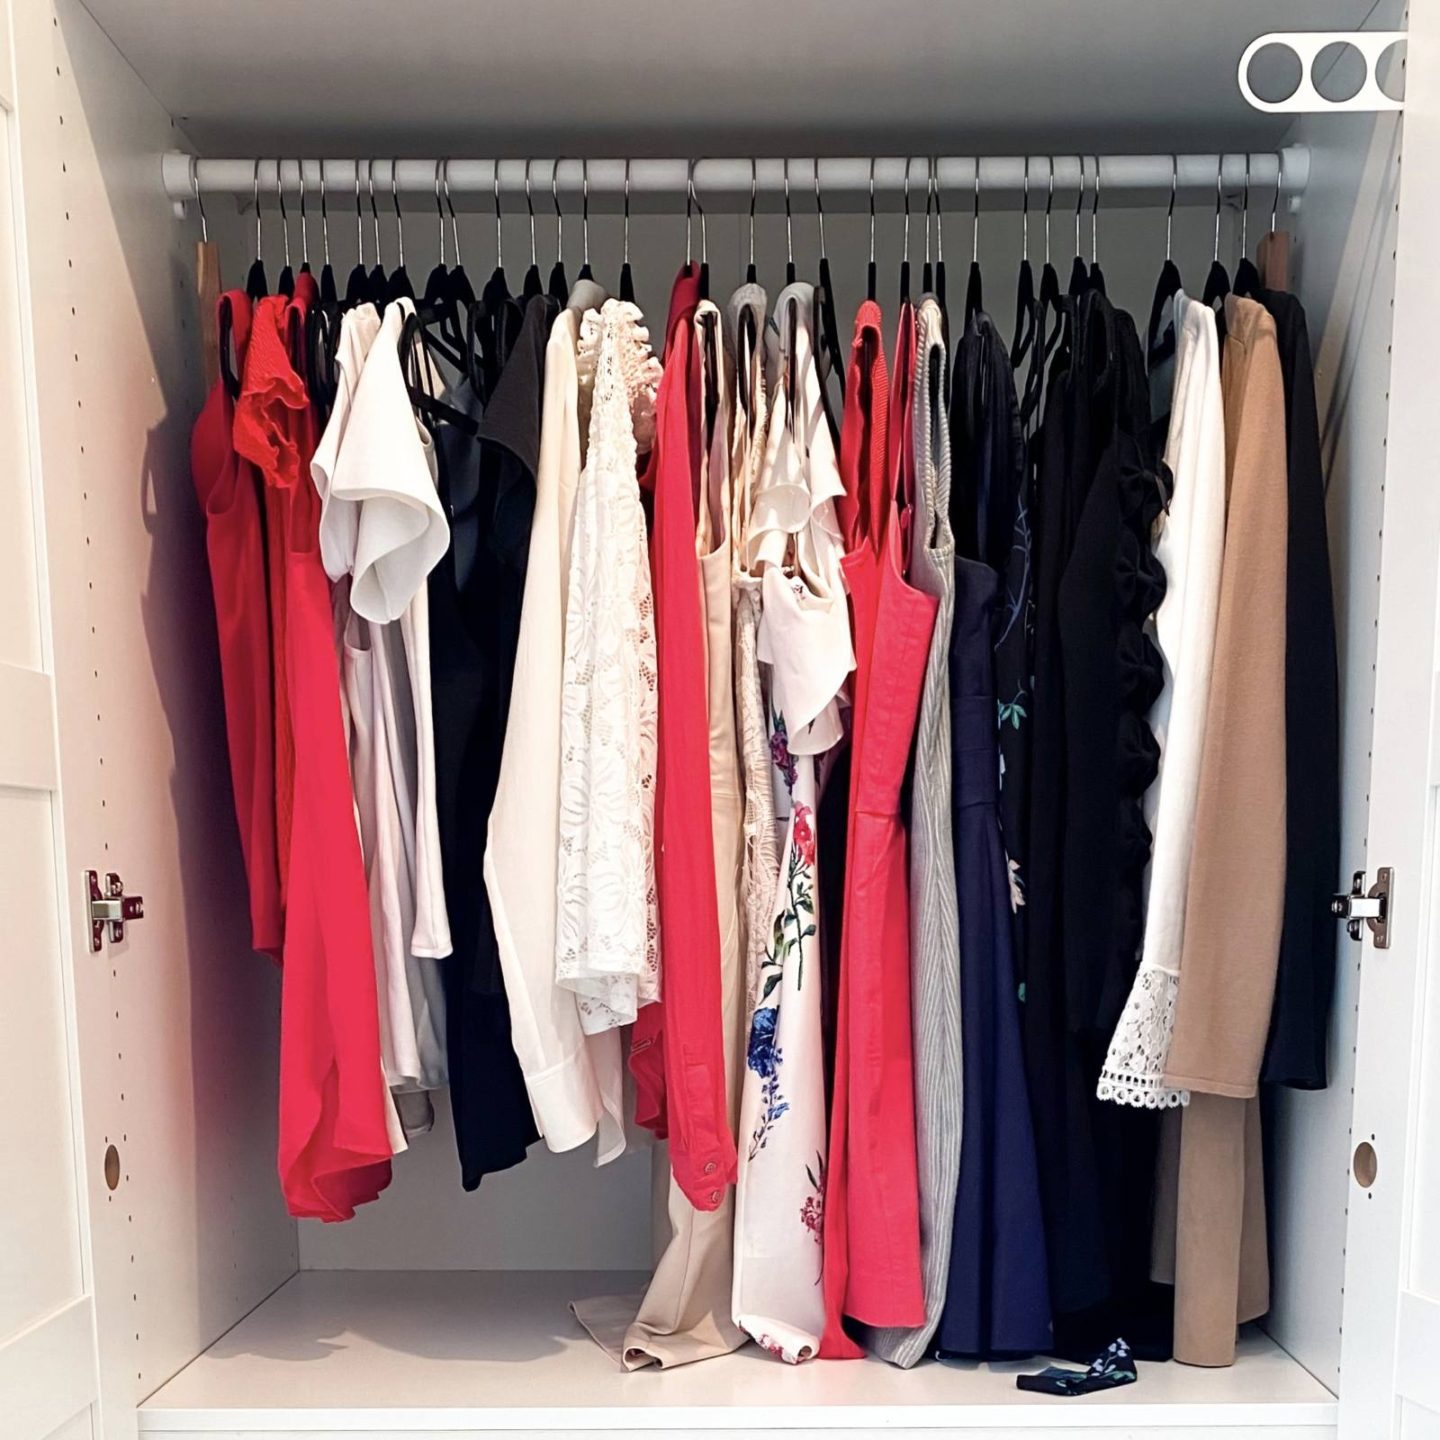 https://kimbedene.com/wp-content/uploads/2019/11/How-to-organise-your-closet-like-a-minimalist-color-coordinated-capsule-wardrobe-before-1440x1440.jpeg